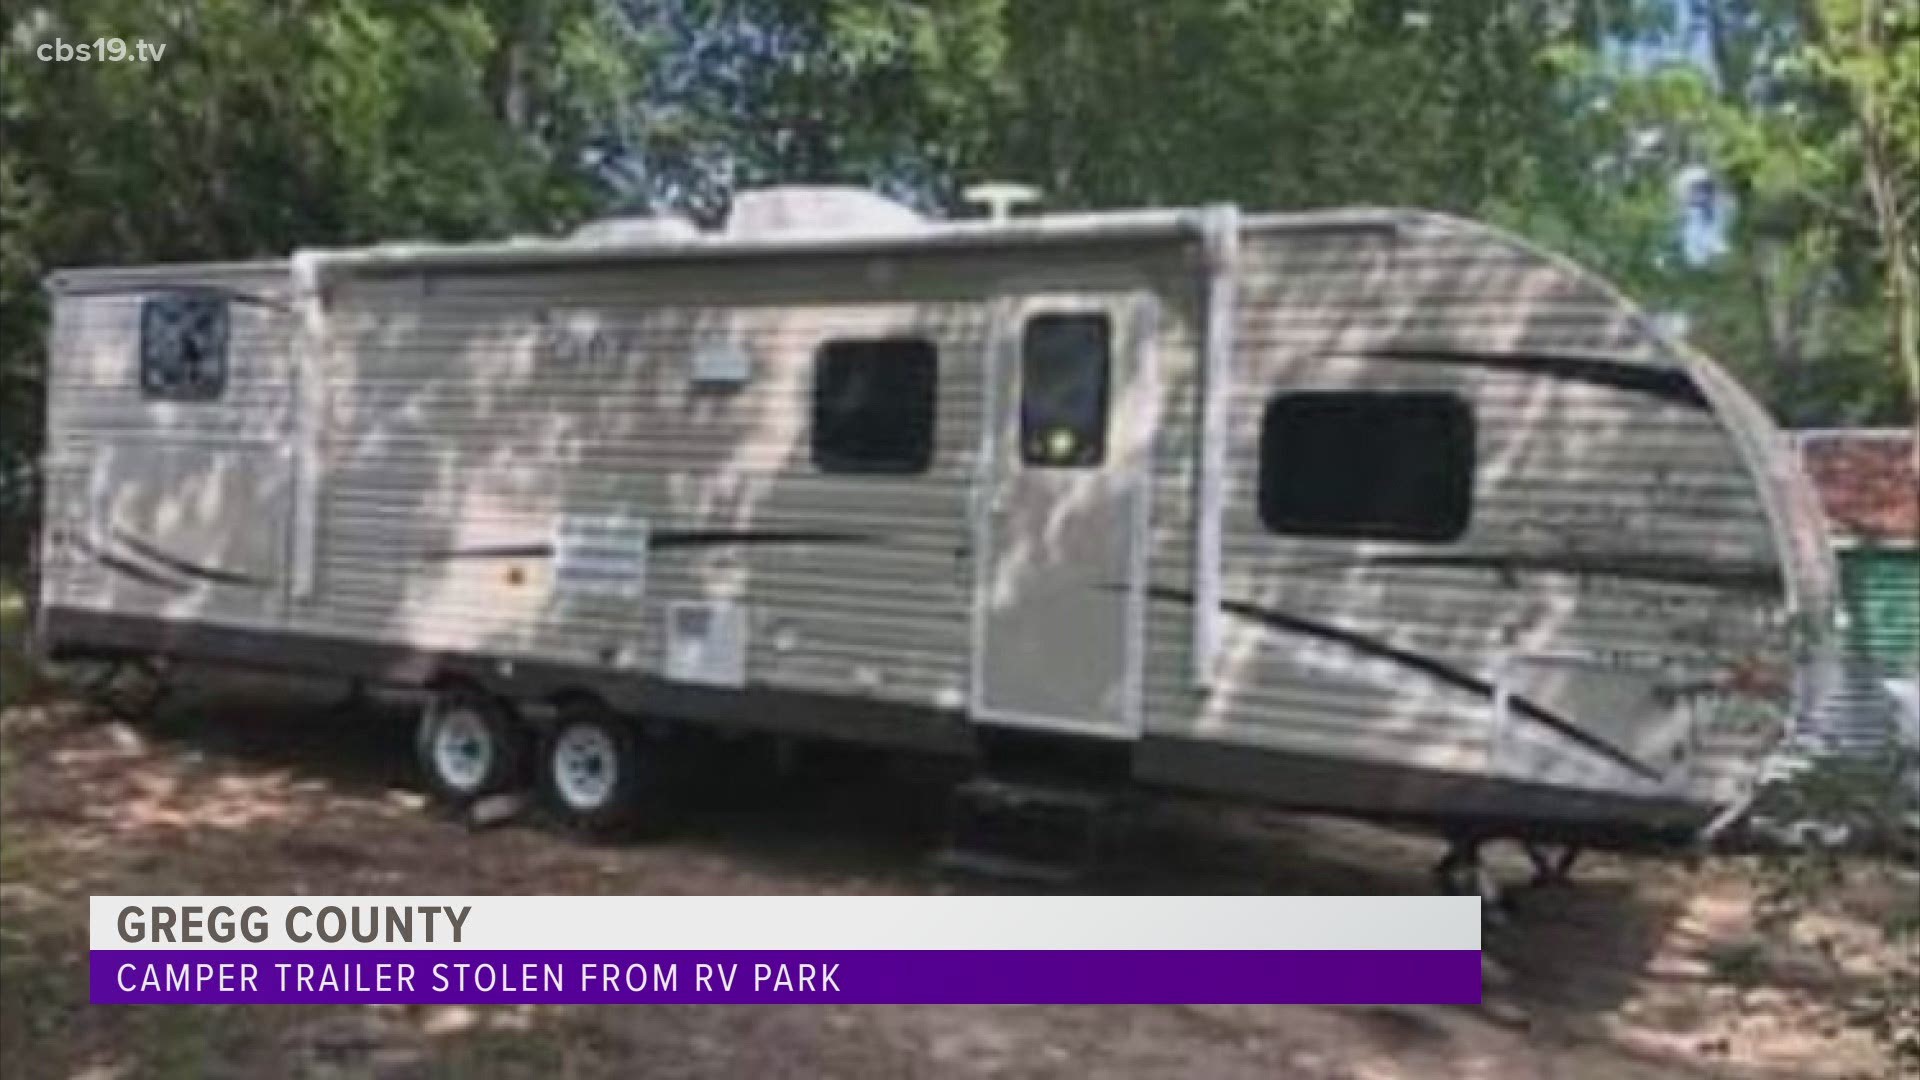 The Gregg County Sheriff's Office is seeking information regarding a camper trailer that was reported stolen.